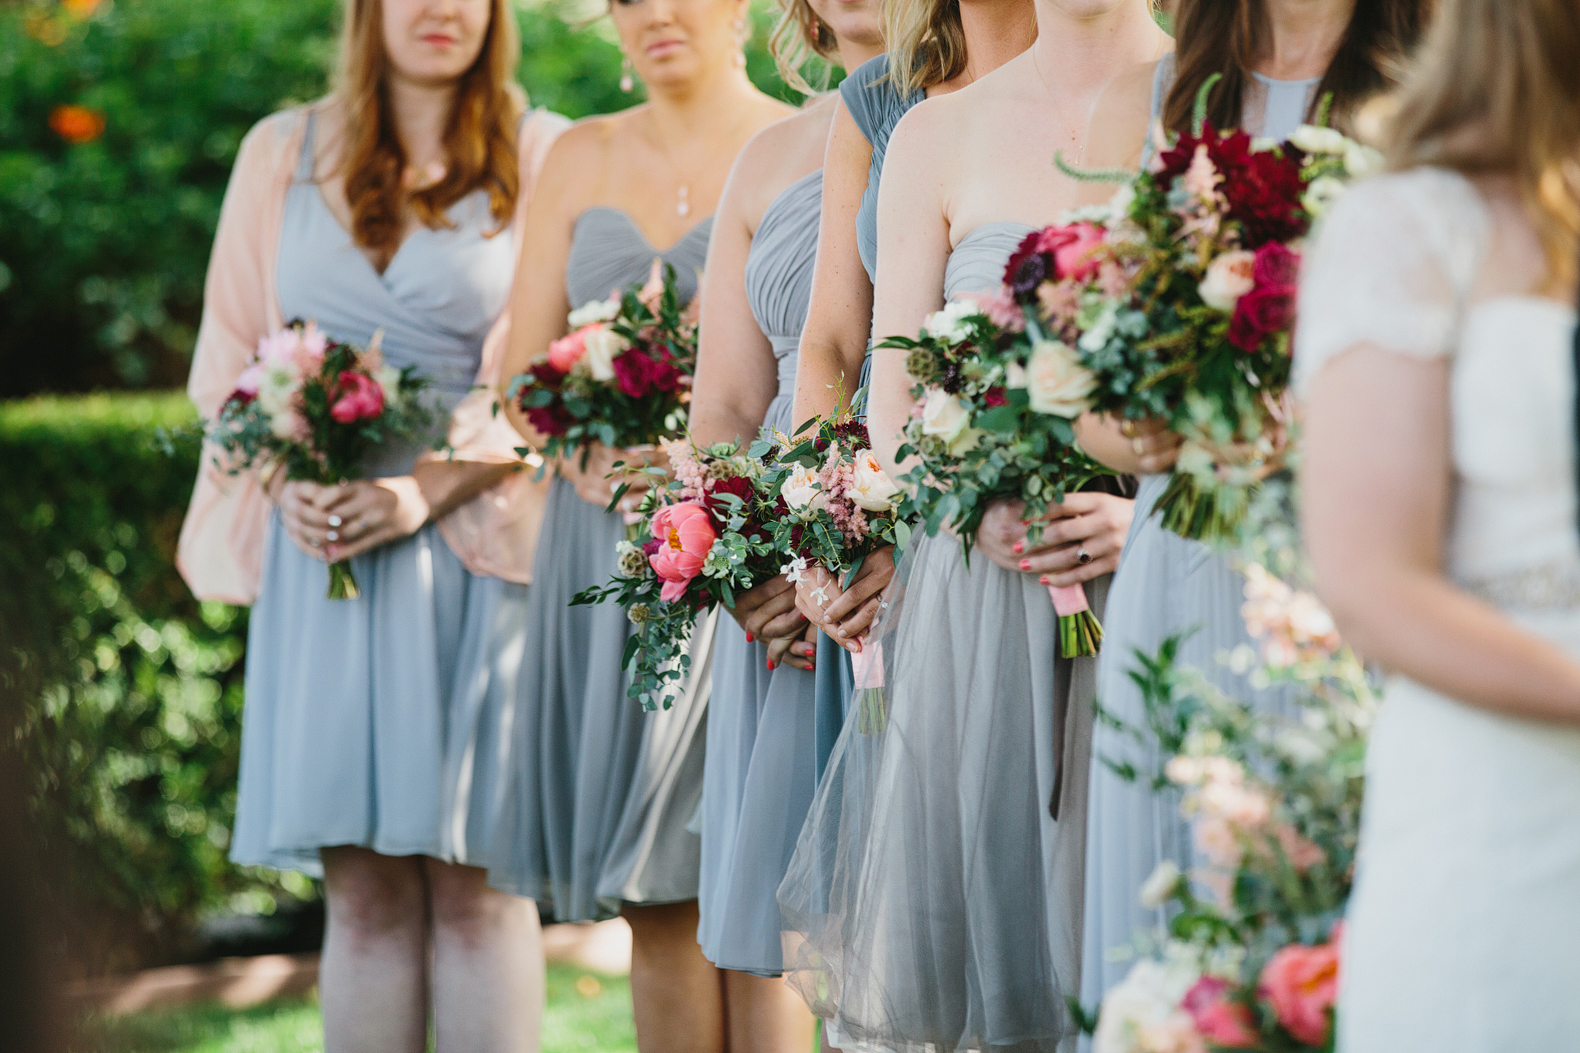 These are the bridesmaids' bouquets.